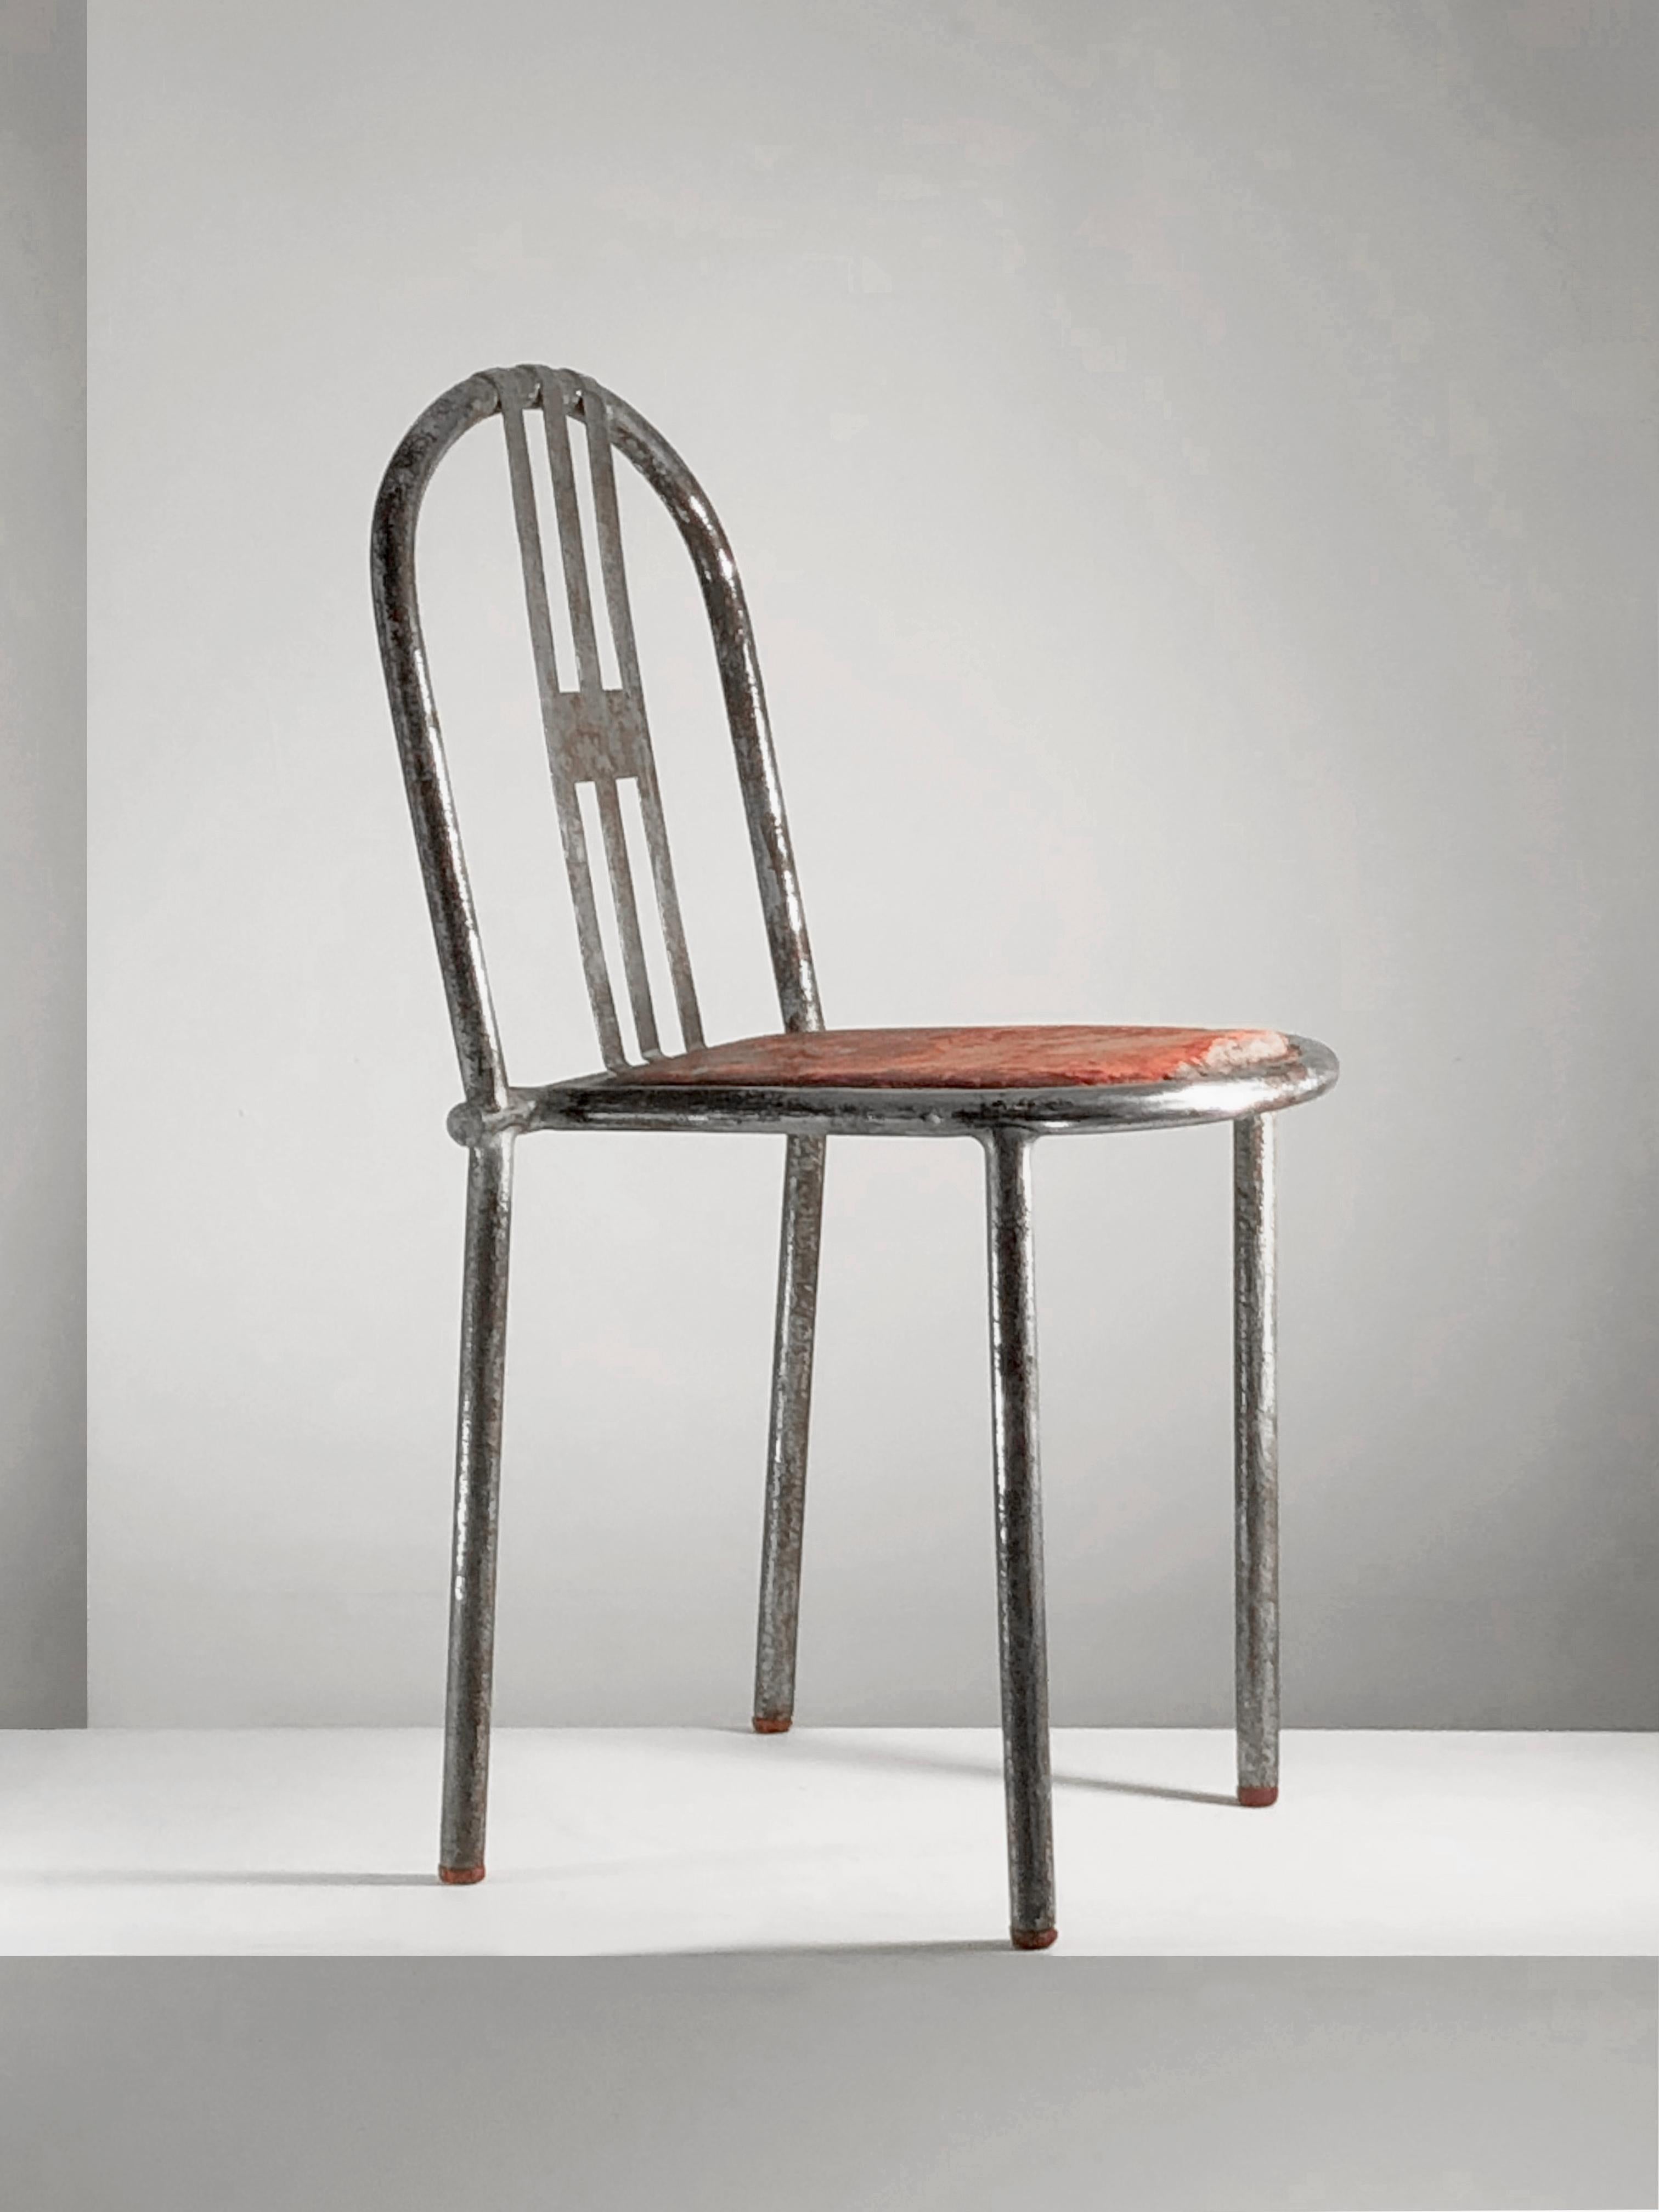 We are presenting 2 rare pieces on sale one by one on 1stDibs :
the earliest and rarely seen version of the iconic Tubor chair created by French Architect Robert Mallet-Stevens, certainly at the end of 1920’.
The version we have appears in the